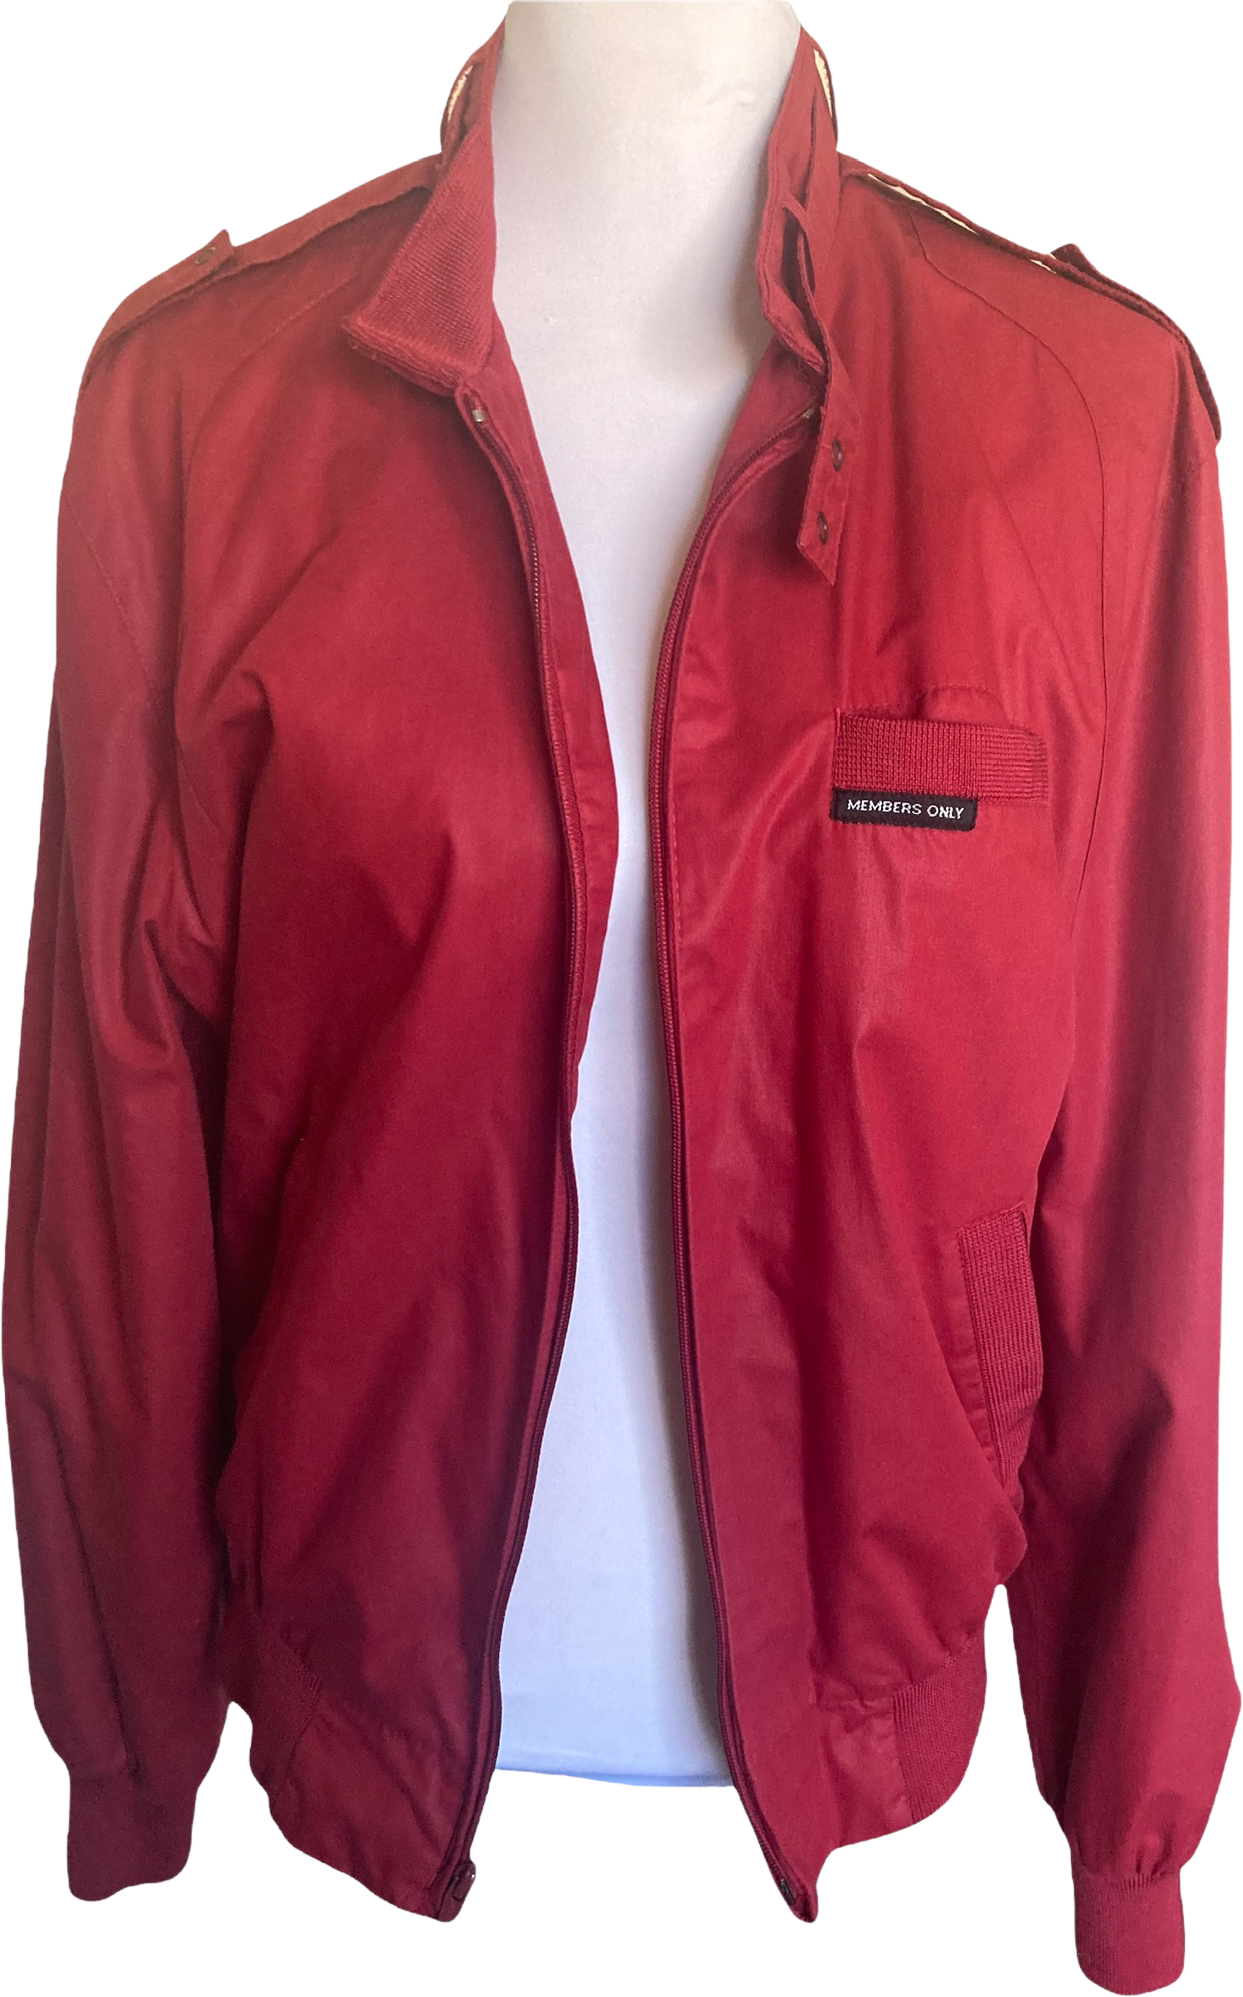 Members Only jackets! : r/80s